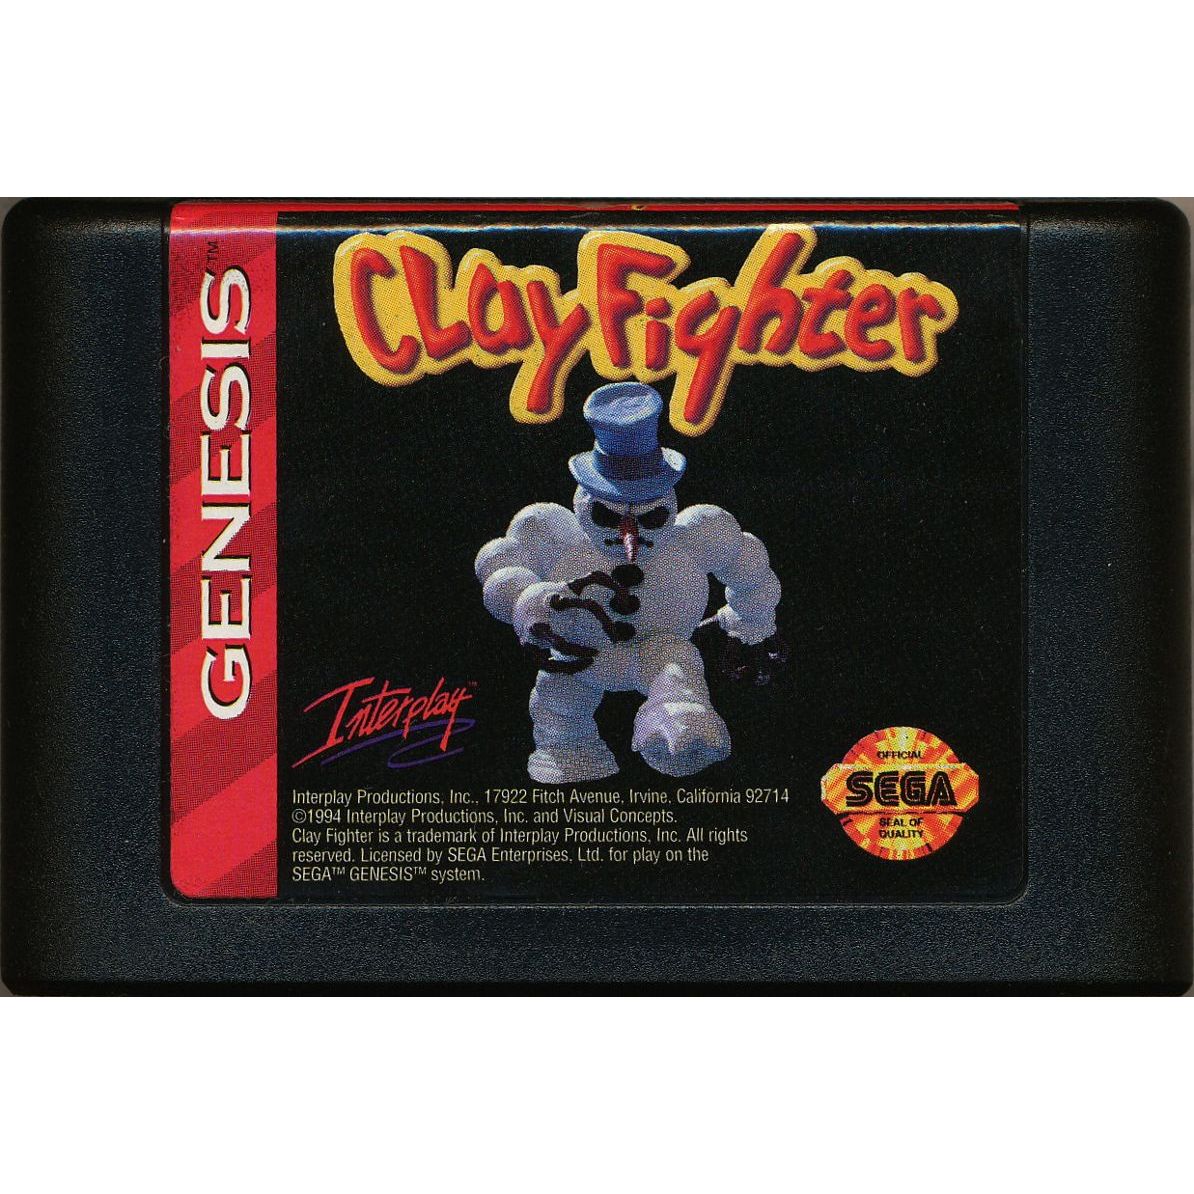 Genesis - Clayfighter (Cartridge Only)